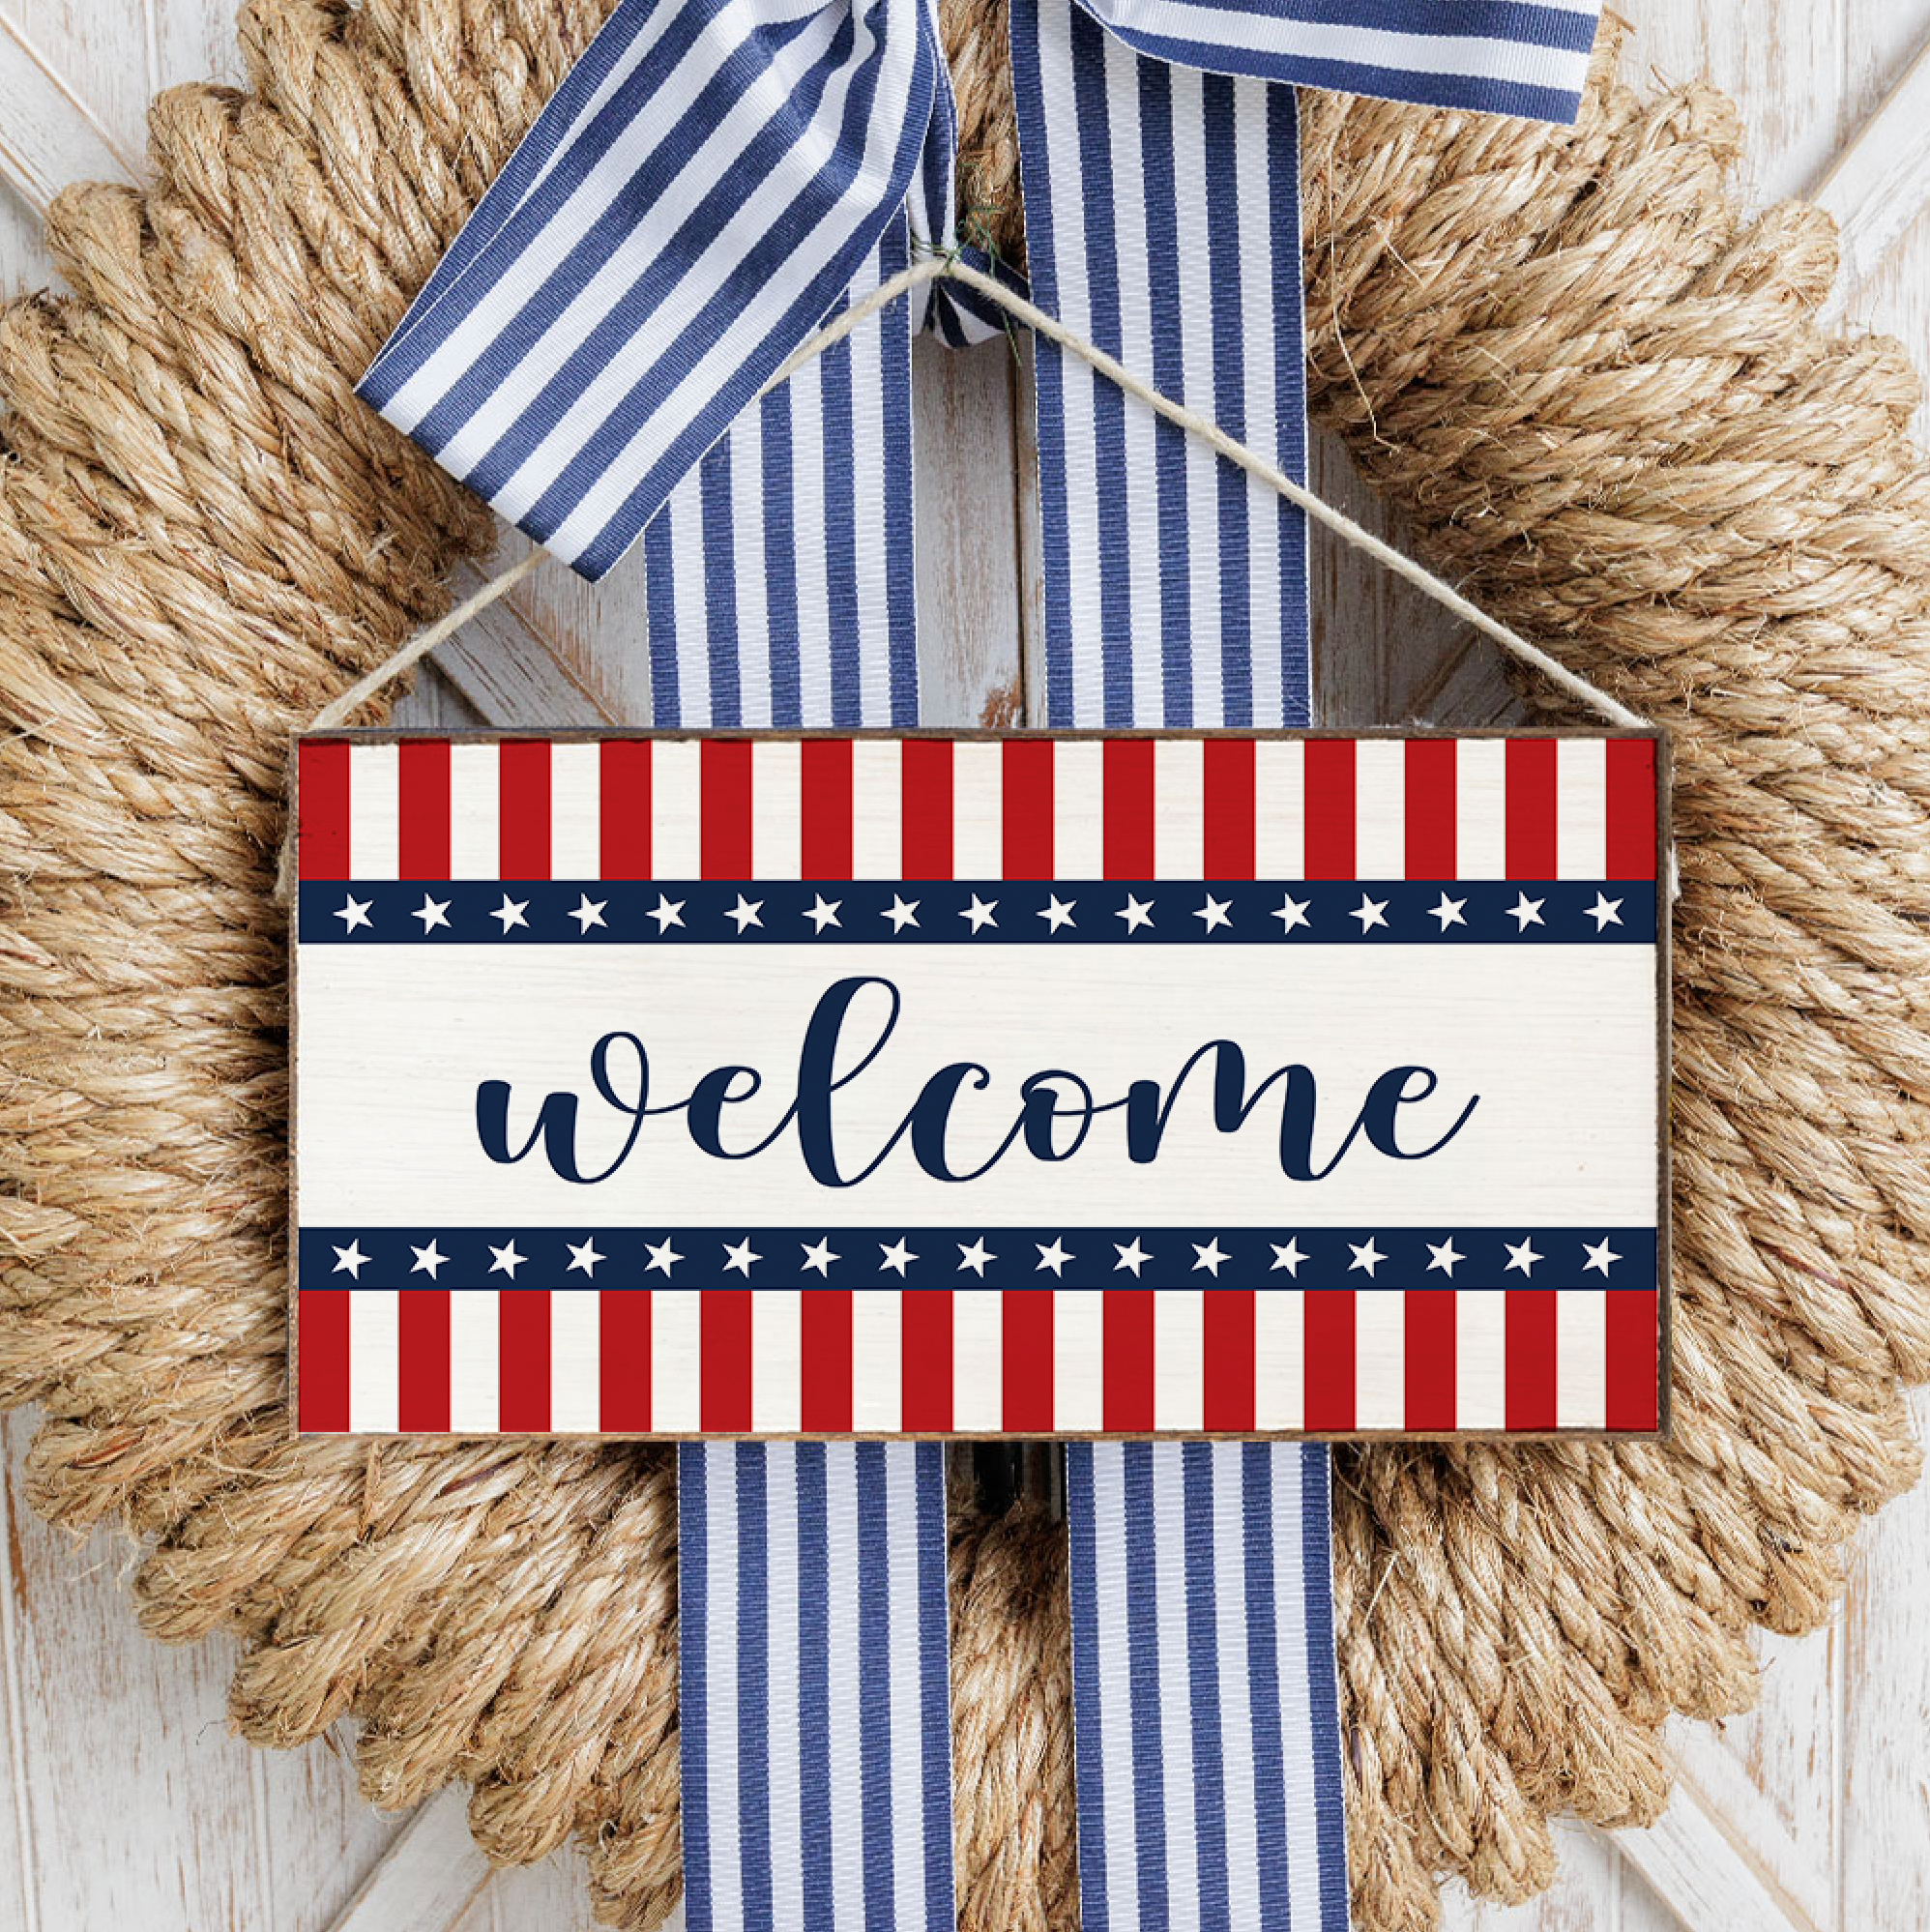 star-spangled-welcome-twine-hanging-sign